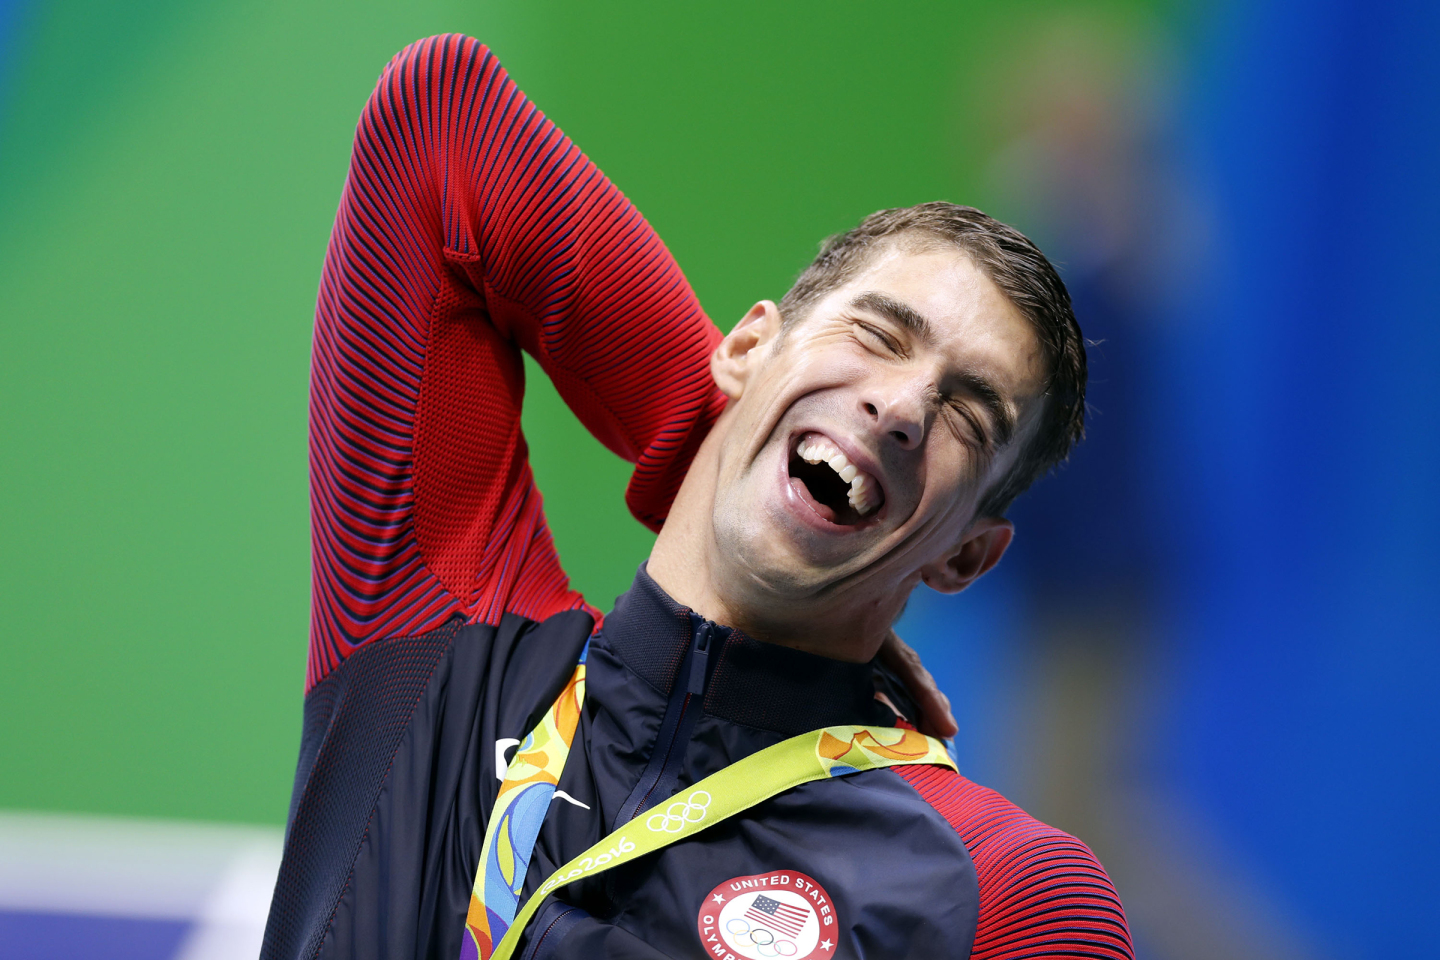 Michael Phelps of the United States of America reacts during the awarding ceremony for men?s 4x200m freestyle relay final of swimming at the 2016 Rio Olympic Games in Rio de Janeiro, Brazil, on Aug. 9, 2016. The U.S. won the gold medal with 7 minute 0.66 seconds. / CHINA OUT